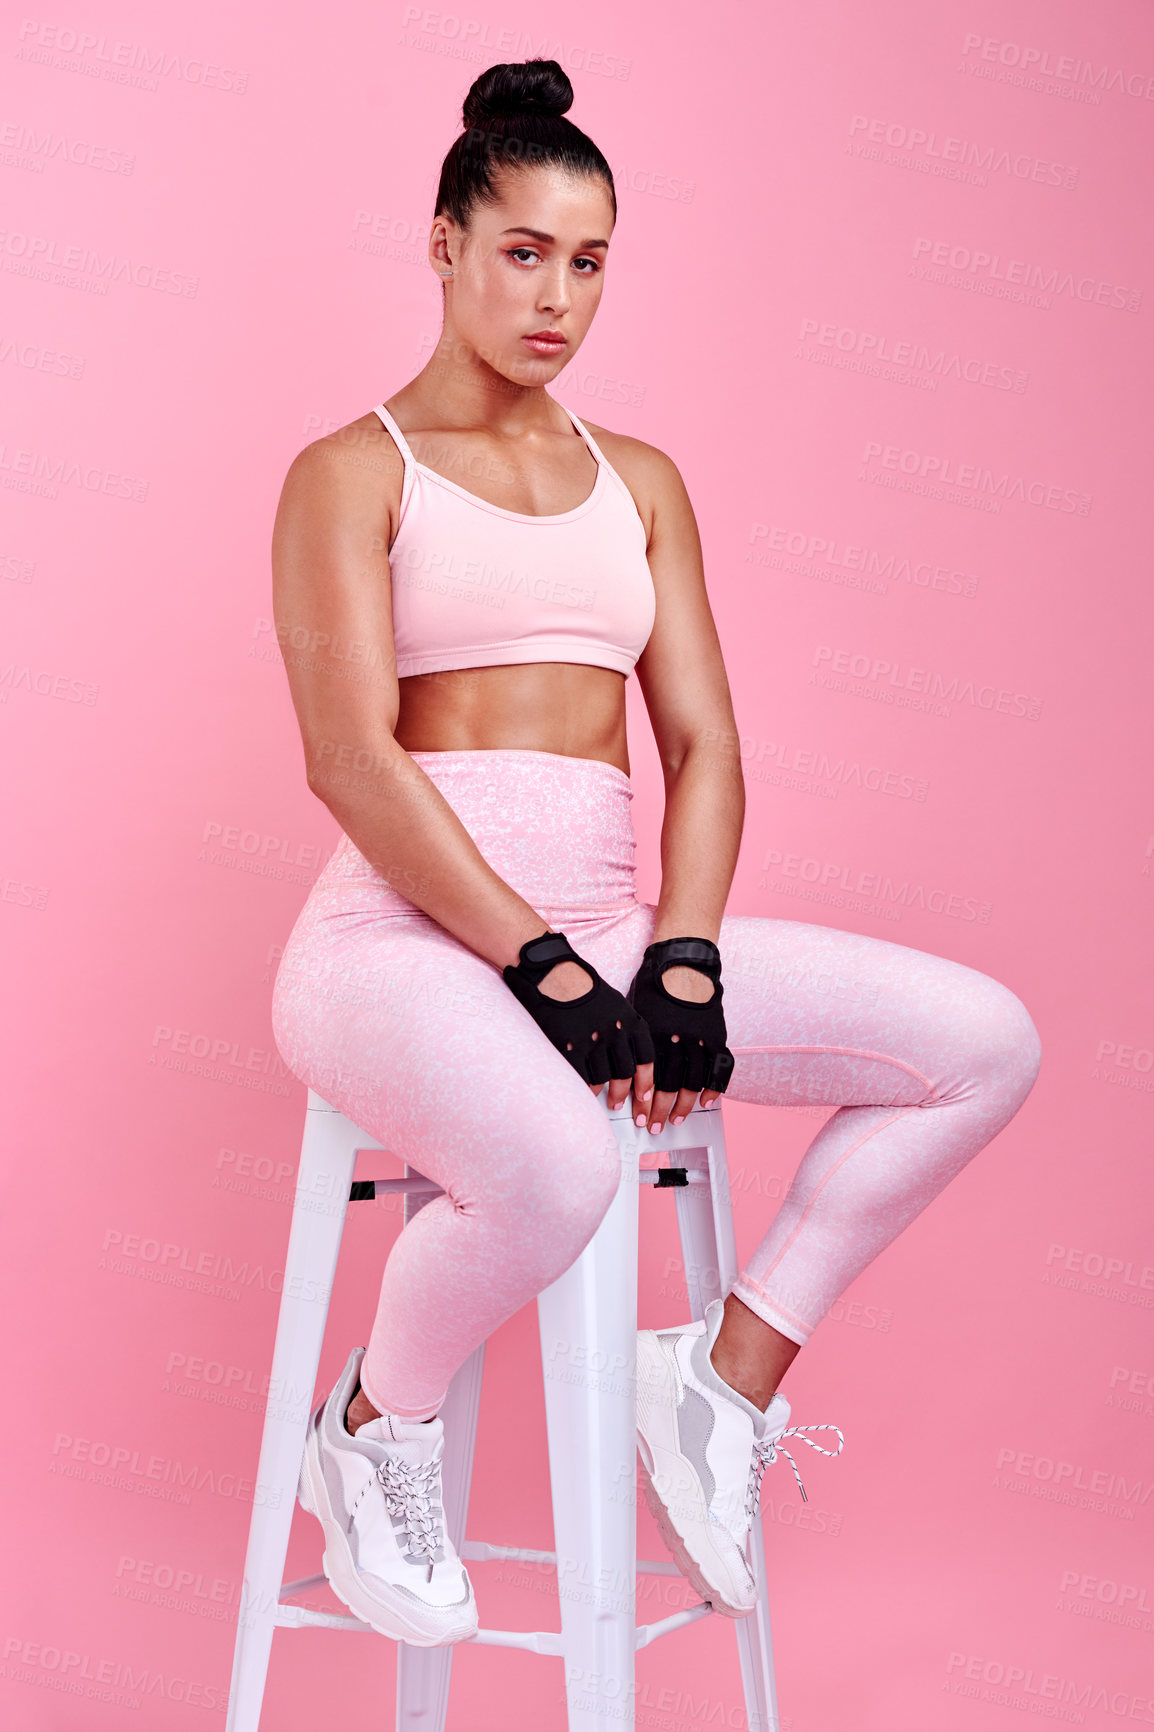 Buy stock photo Studio portrait of a sporty young woman sitting on a chair against a pink background